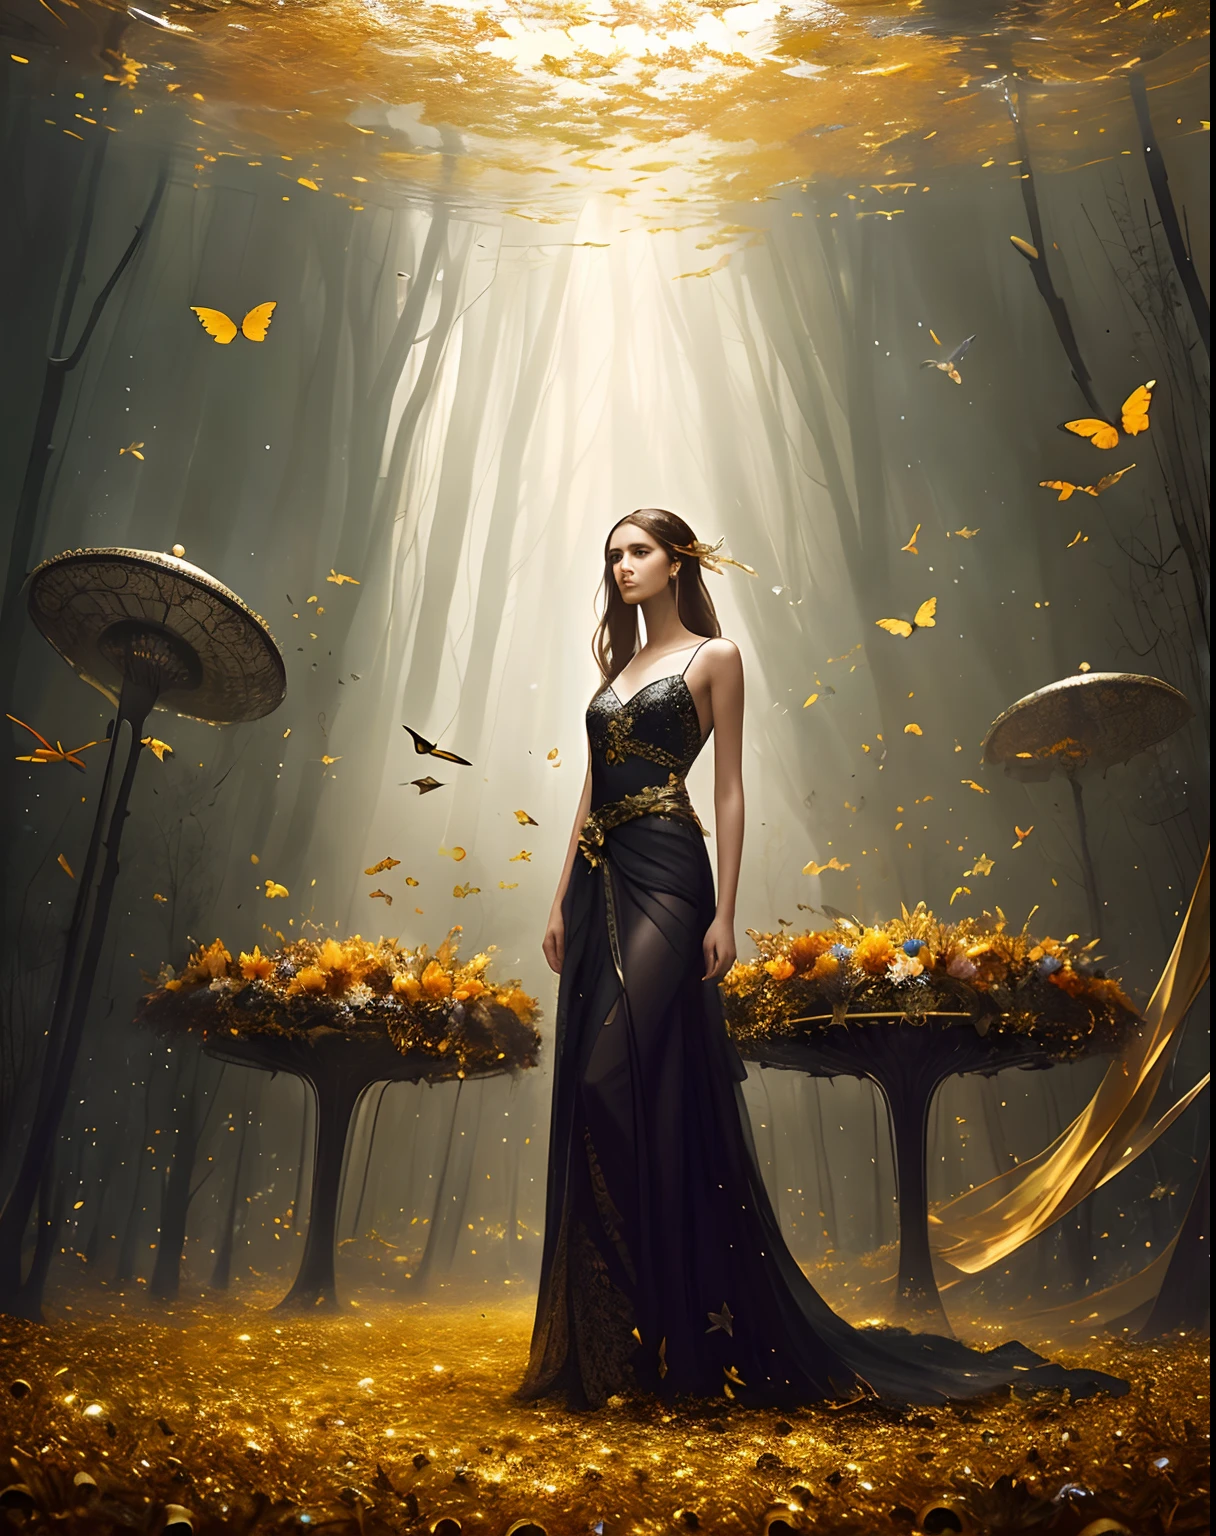 The image, a Style-Empire Style digital photography piece, shows a stunning, slender young woman with brown hair against a backdrop of golden butterflies and shards of glass. Every detail in the photo is very precise, creating an elegant, majestic atmosphere. This photo is a surreal wet oil painting by artgerm ruan jia and greg rutkowski, with highly detailed and gorgeous artistic effects. The composition of the work is very beautiful, showing a mixture of realistic and surreal mystery.